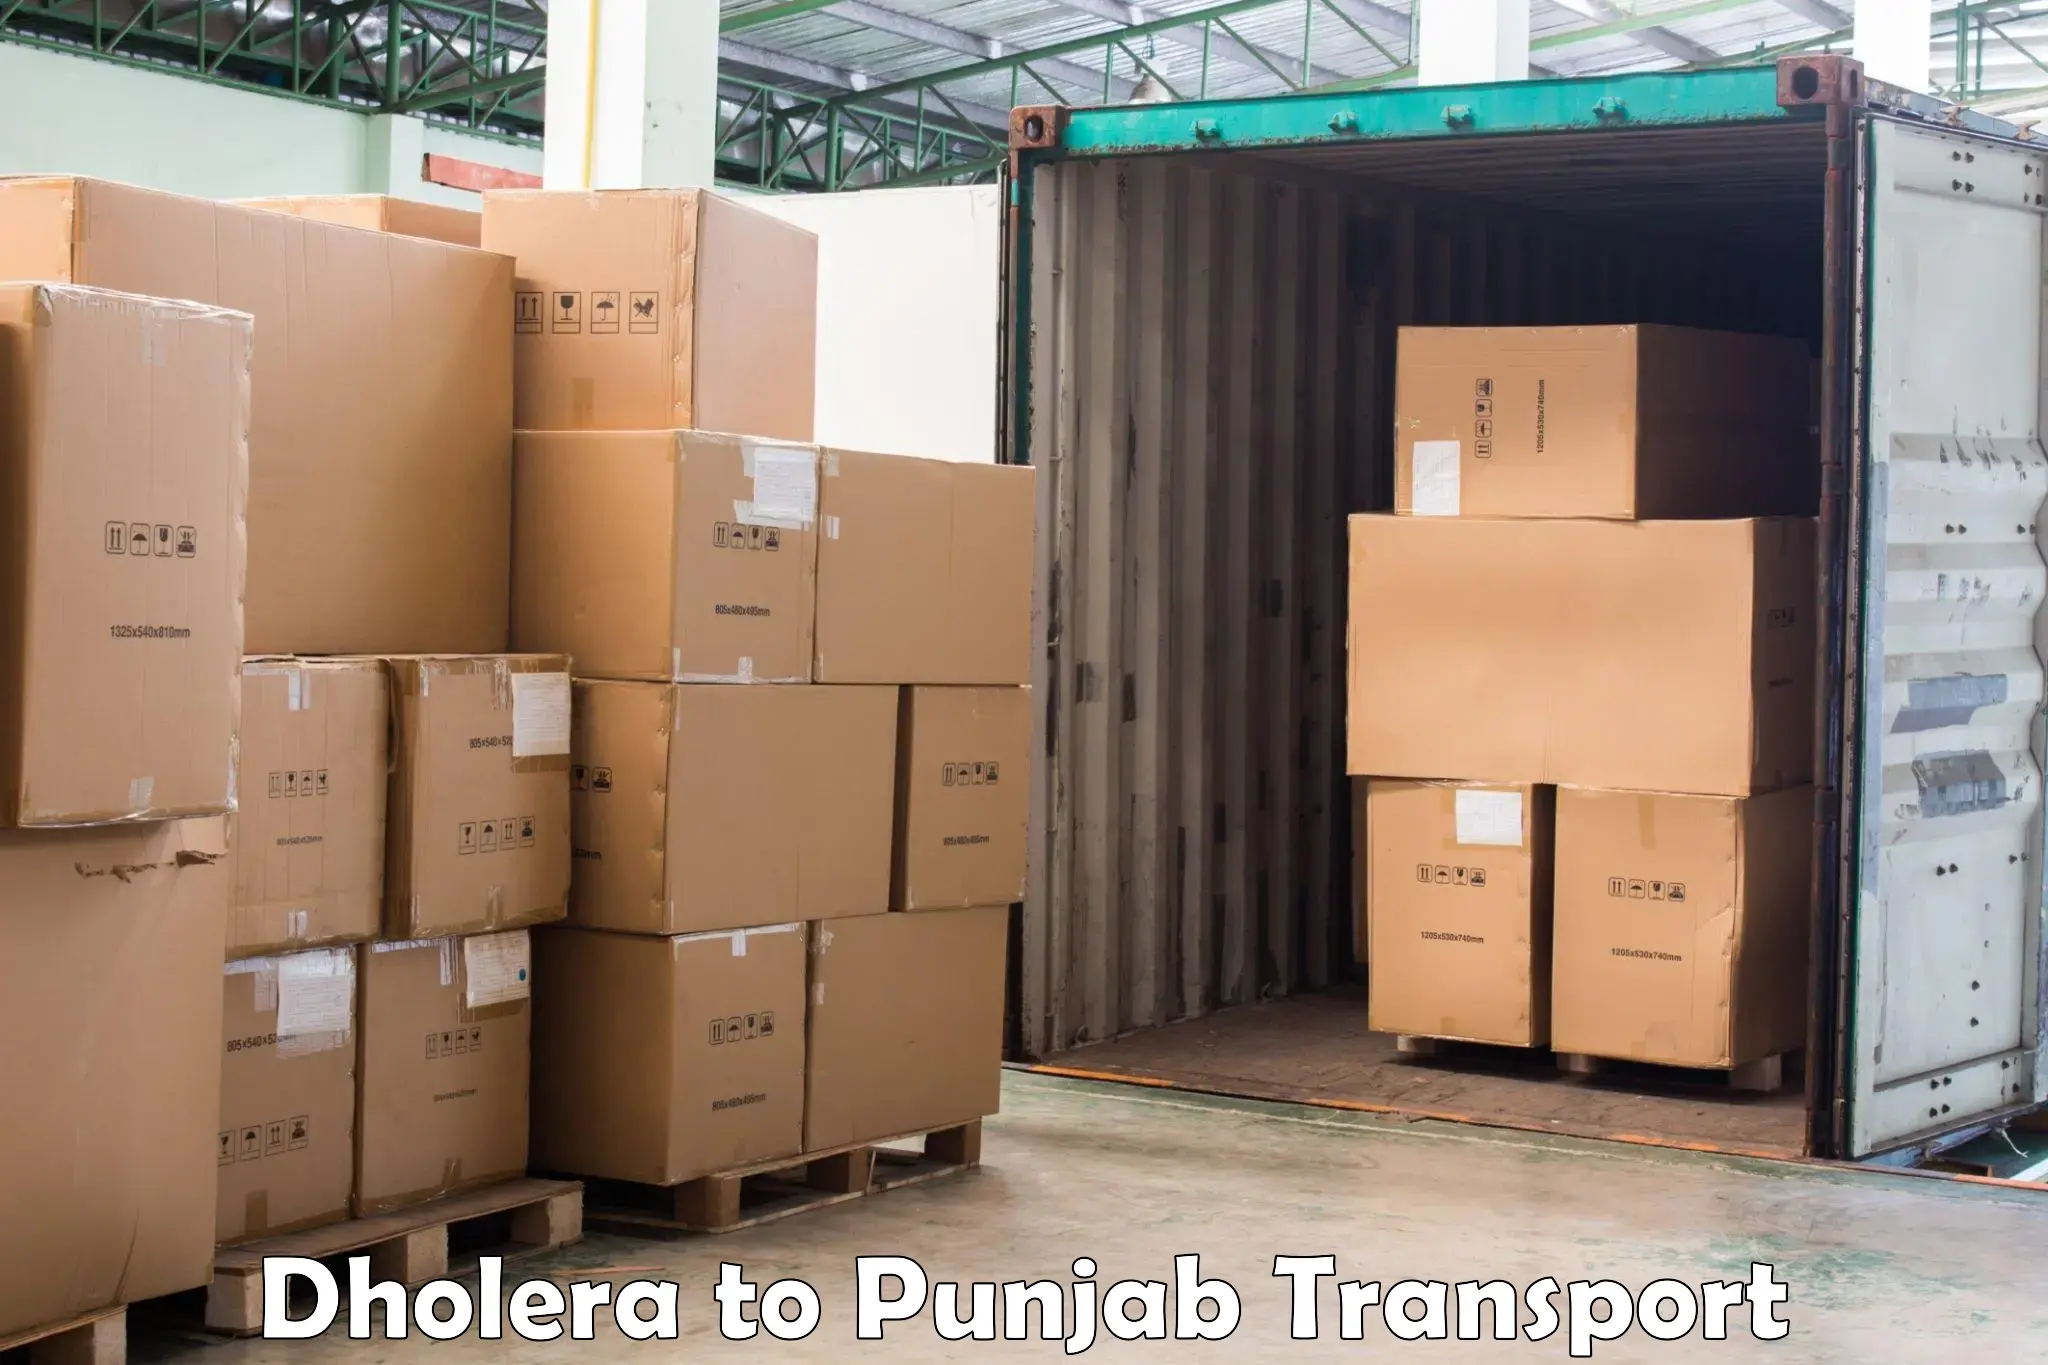 Delivery service Dholera to Patiala